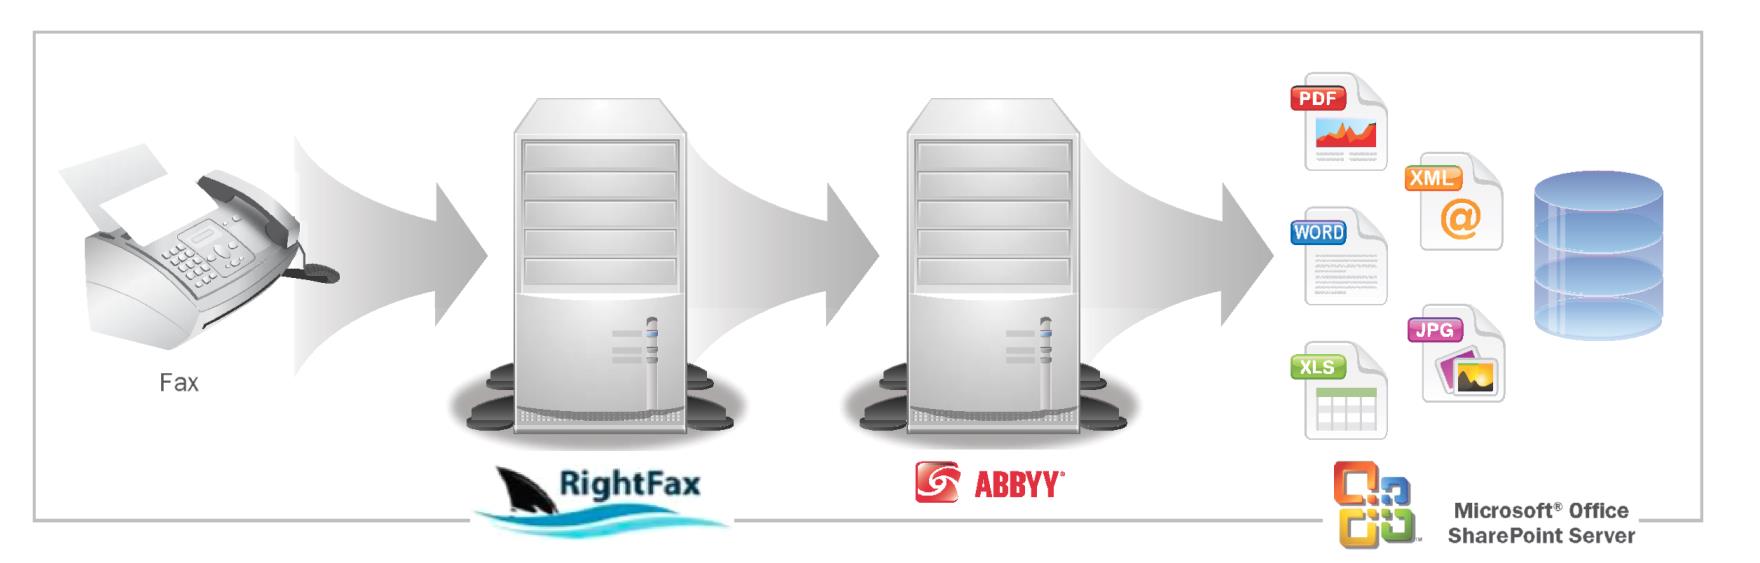 Recognition Server maximizes your RightFax and SharePoint investment 